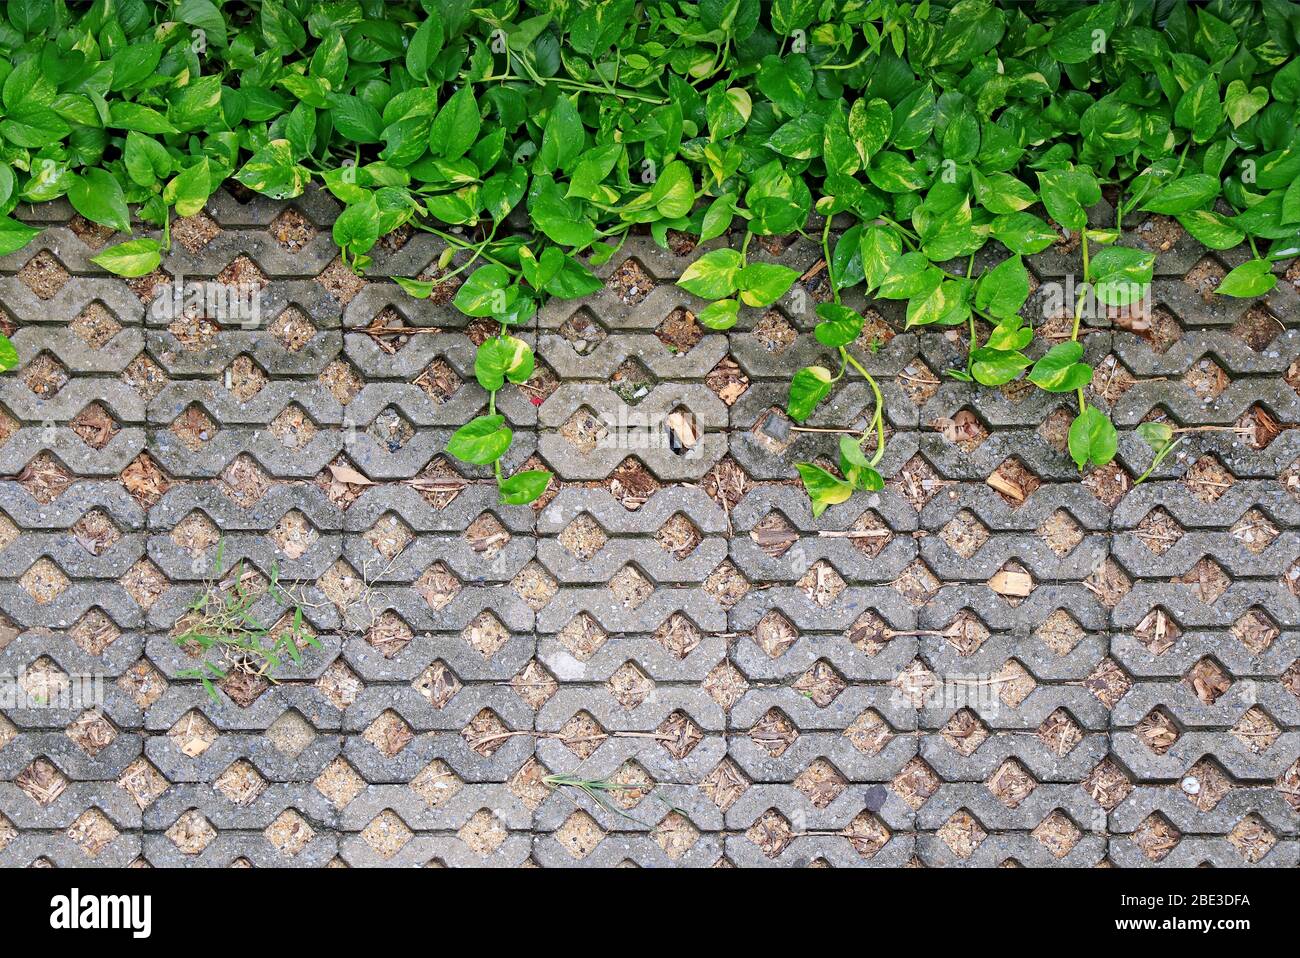 Green Devil's Ivy plants with water droplets on turf stone concrete pavers Stock Photo